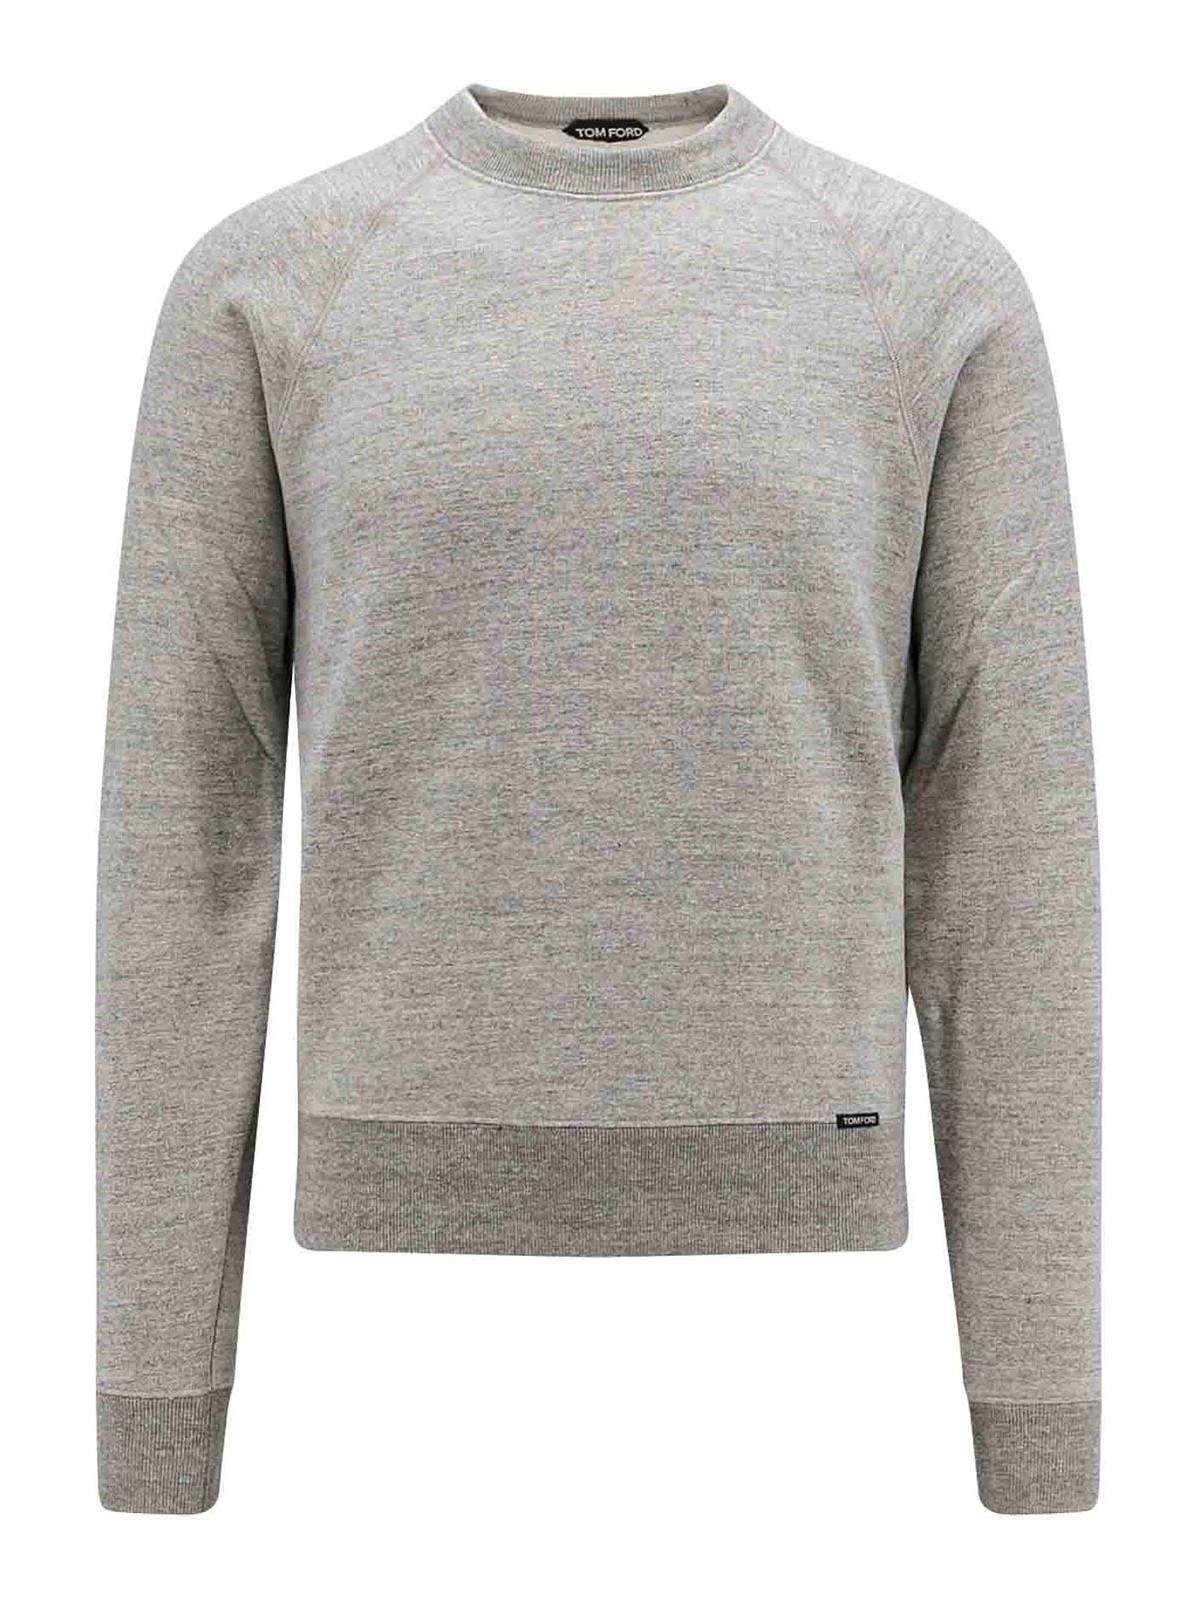 TOM FORD COTTON SWEATSHIRT WITH LOGOED LABEL